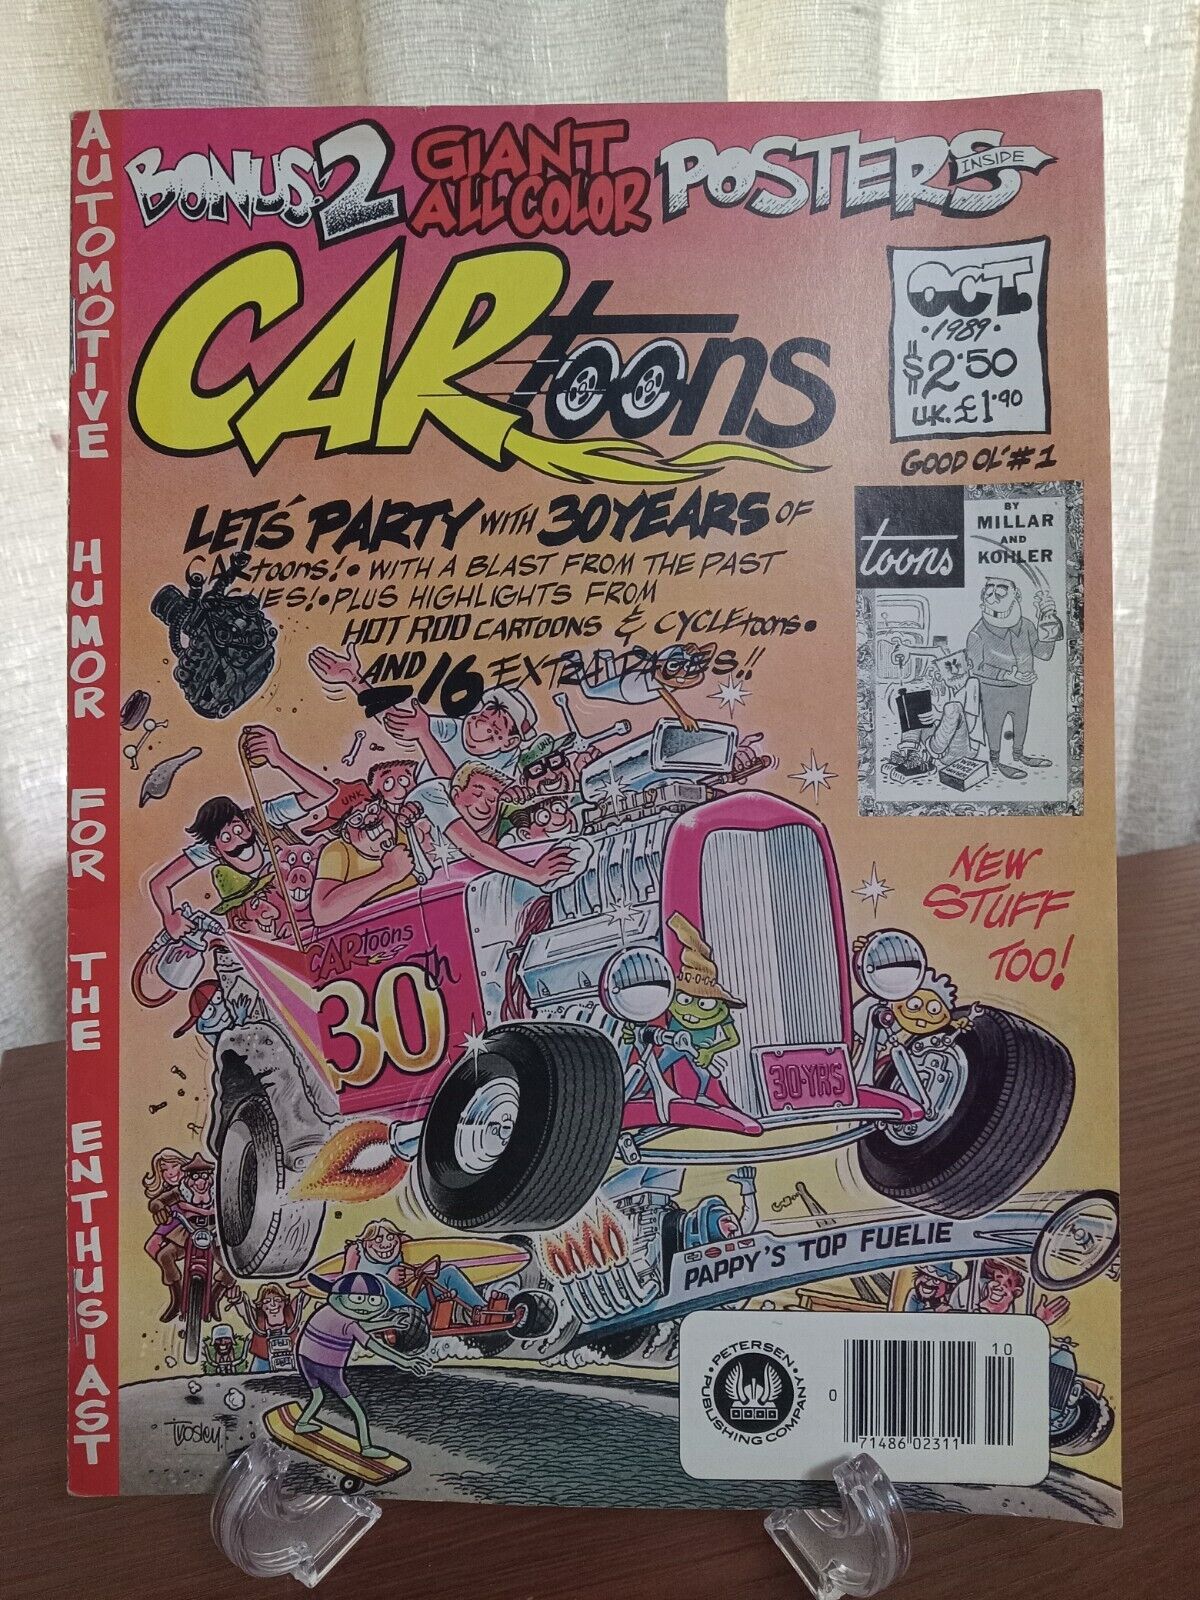 CAR toons Magazine Cartoons October 1989 With Posters